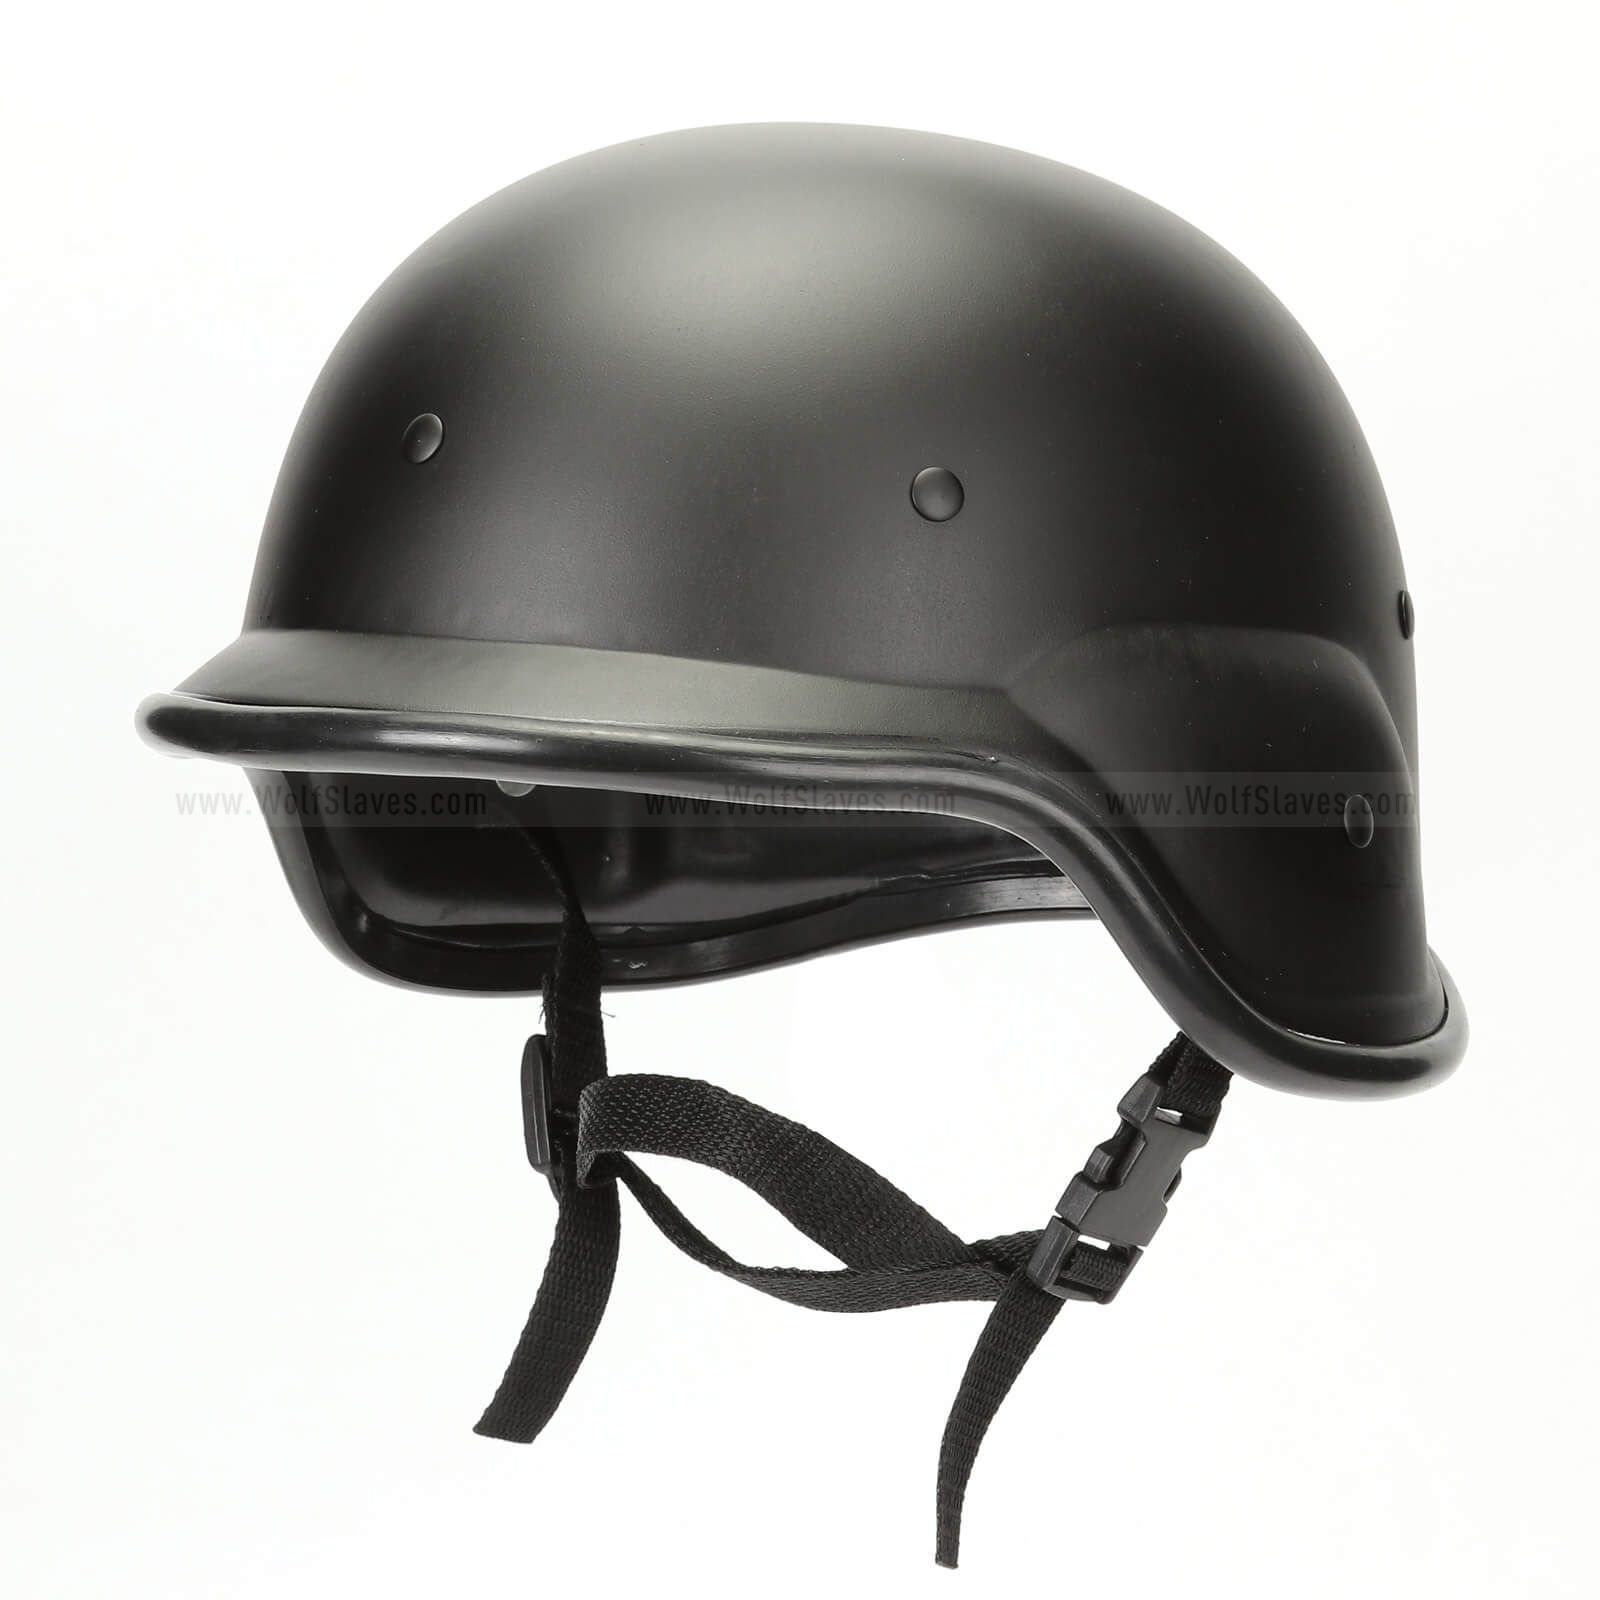 Modern Warrior Tactical M88 Abs Helmet With Adjustable Chin Strap 